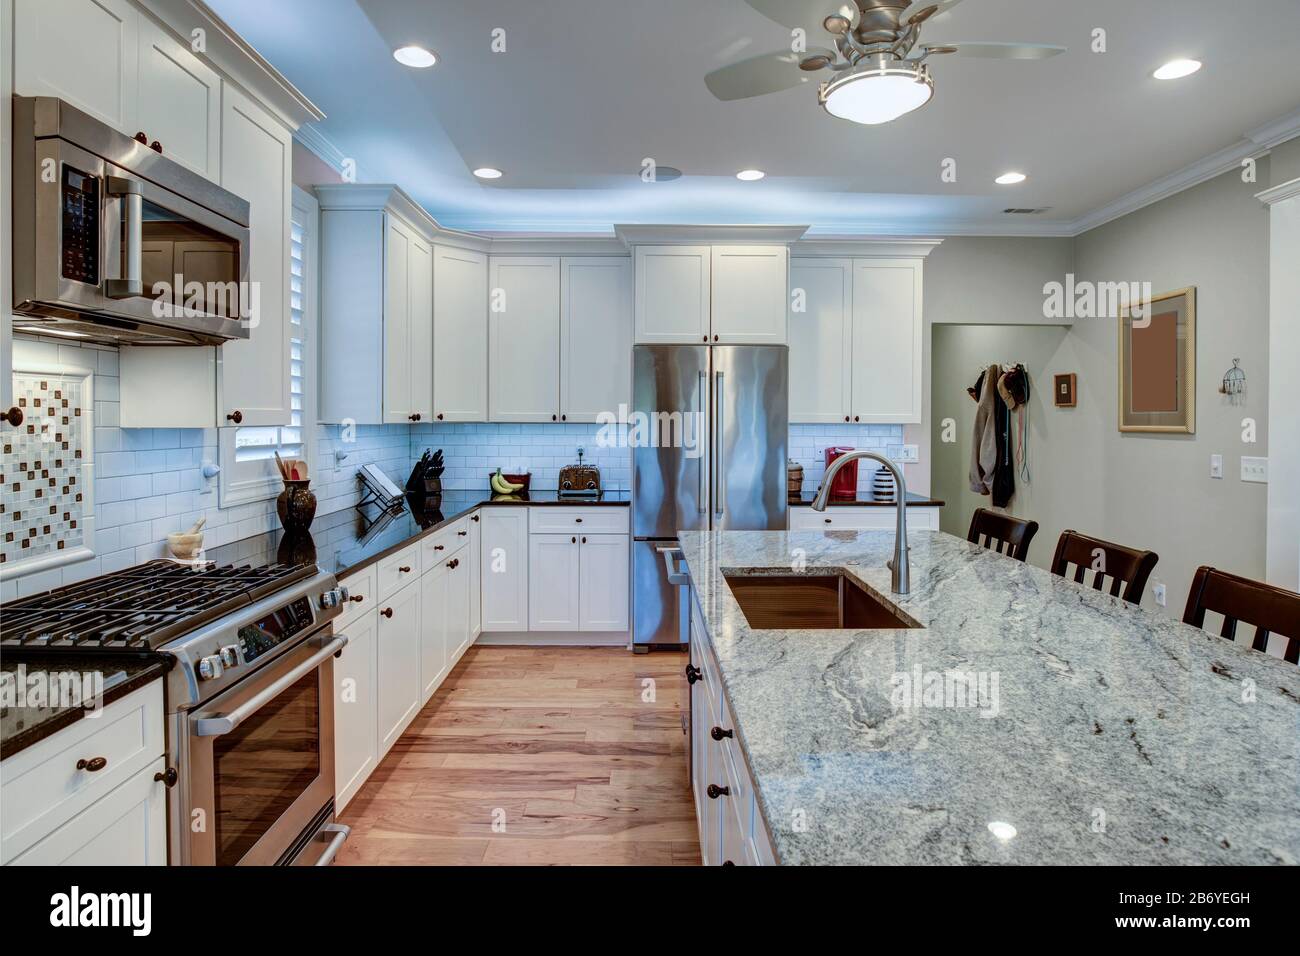 Beautiful Luxury Kitchen With Quartz And Granite Countertops And